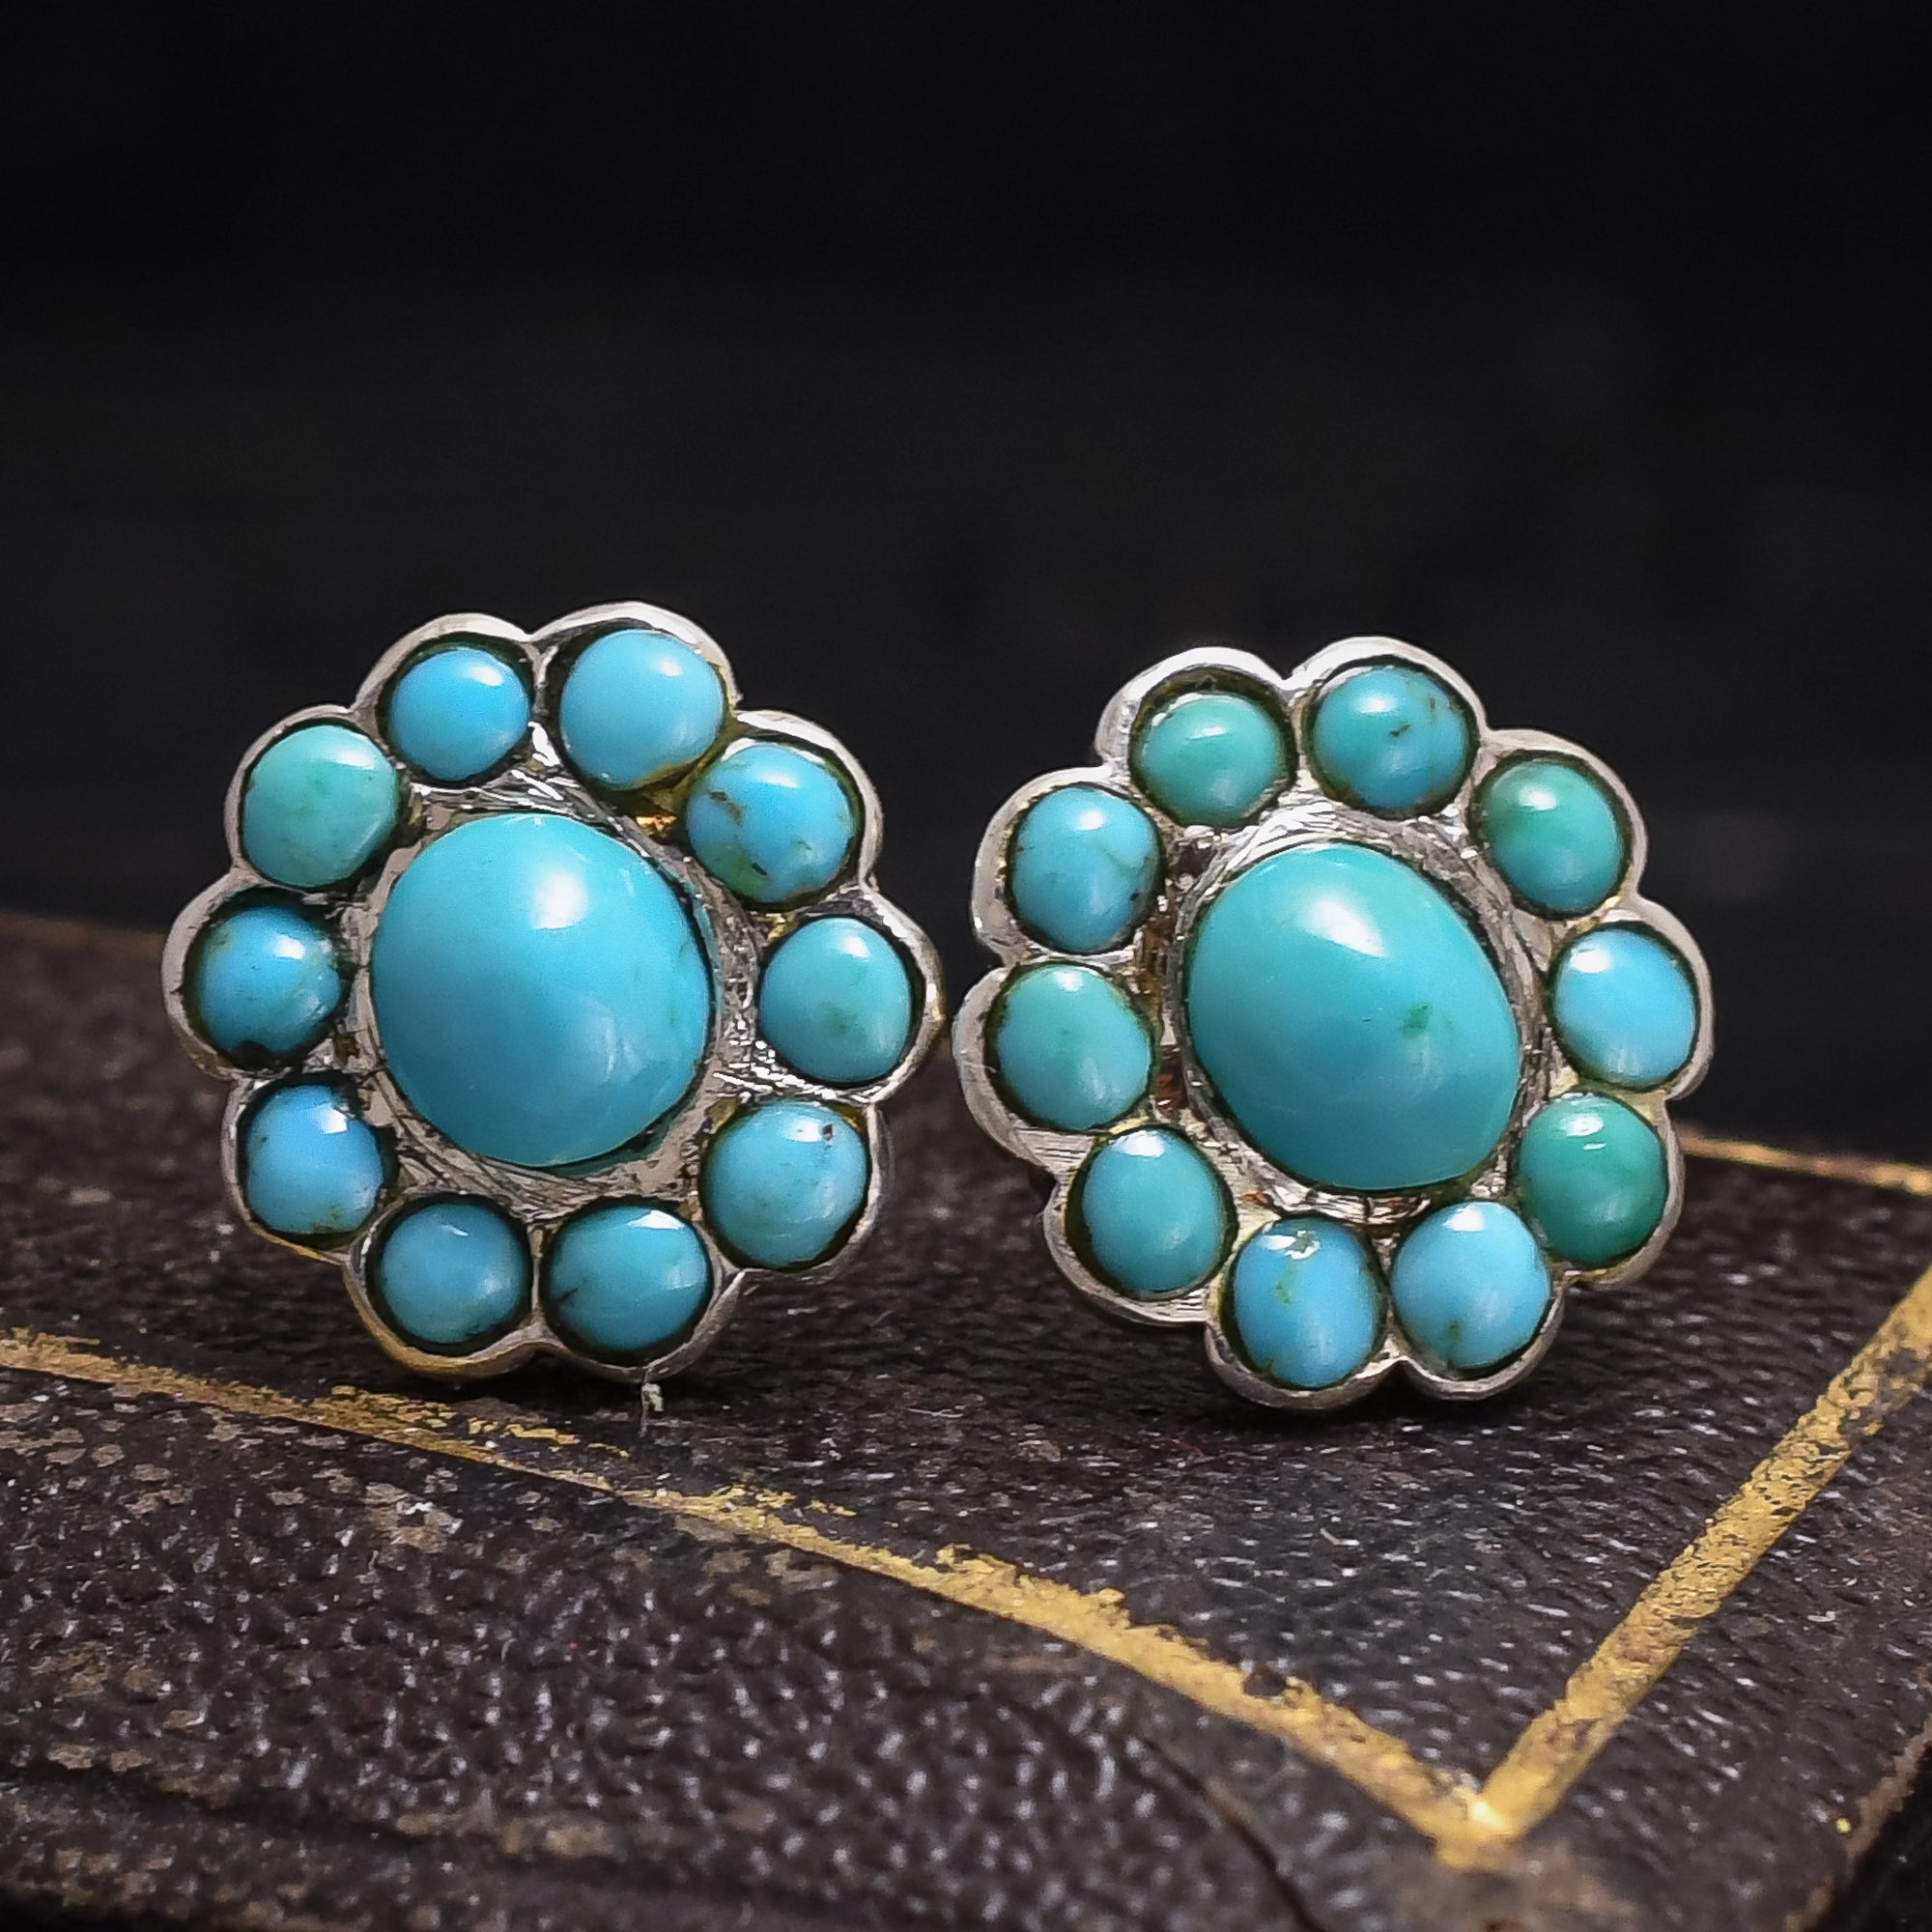 Antique 9ct Turquoise Swallow Earrings, Victorian Bird Stud